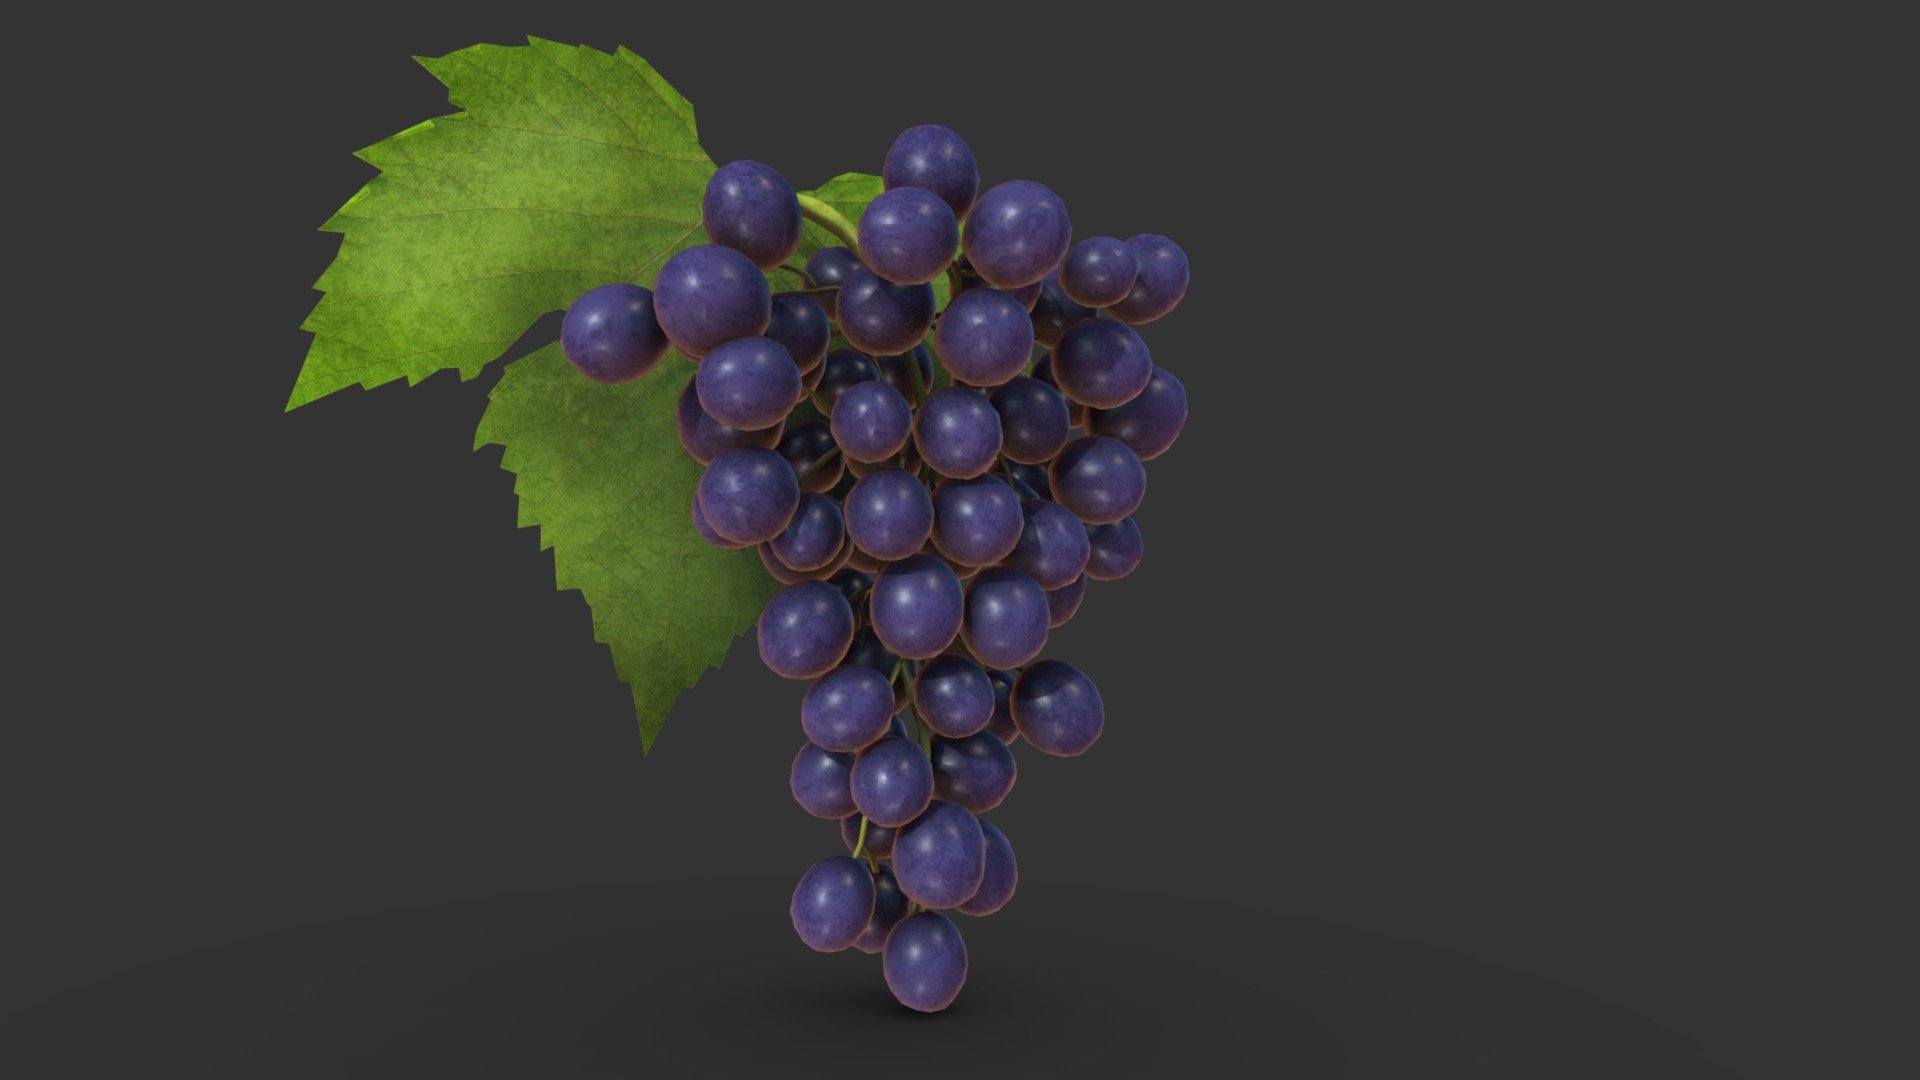 3D Grapes
Downlod Low Mesh for Fast Redndering 
Quality Output Render in Less time - 3D Grapes fruit model - 3D model by Kailash H Kanojia (@KailashHKanojia) 3d model